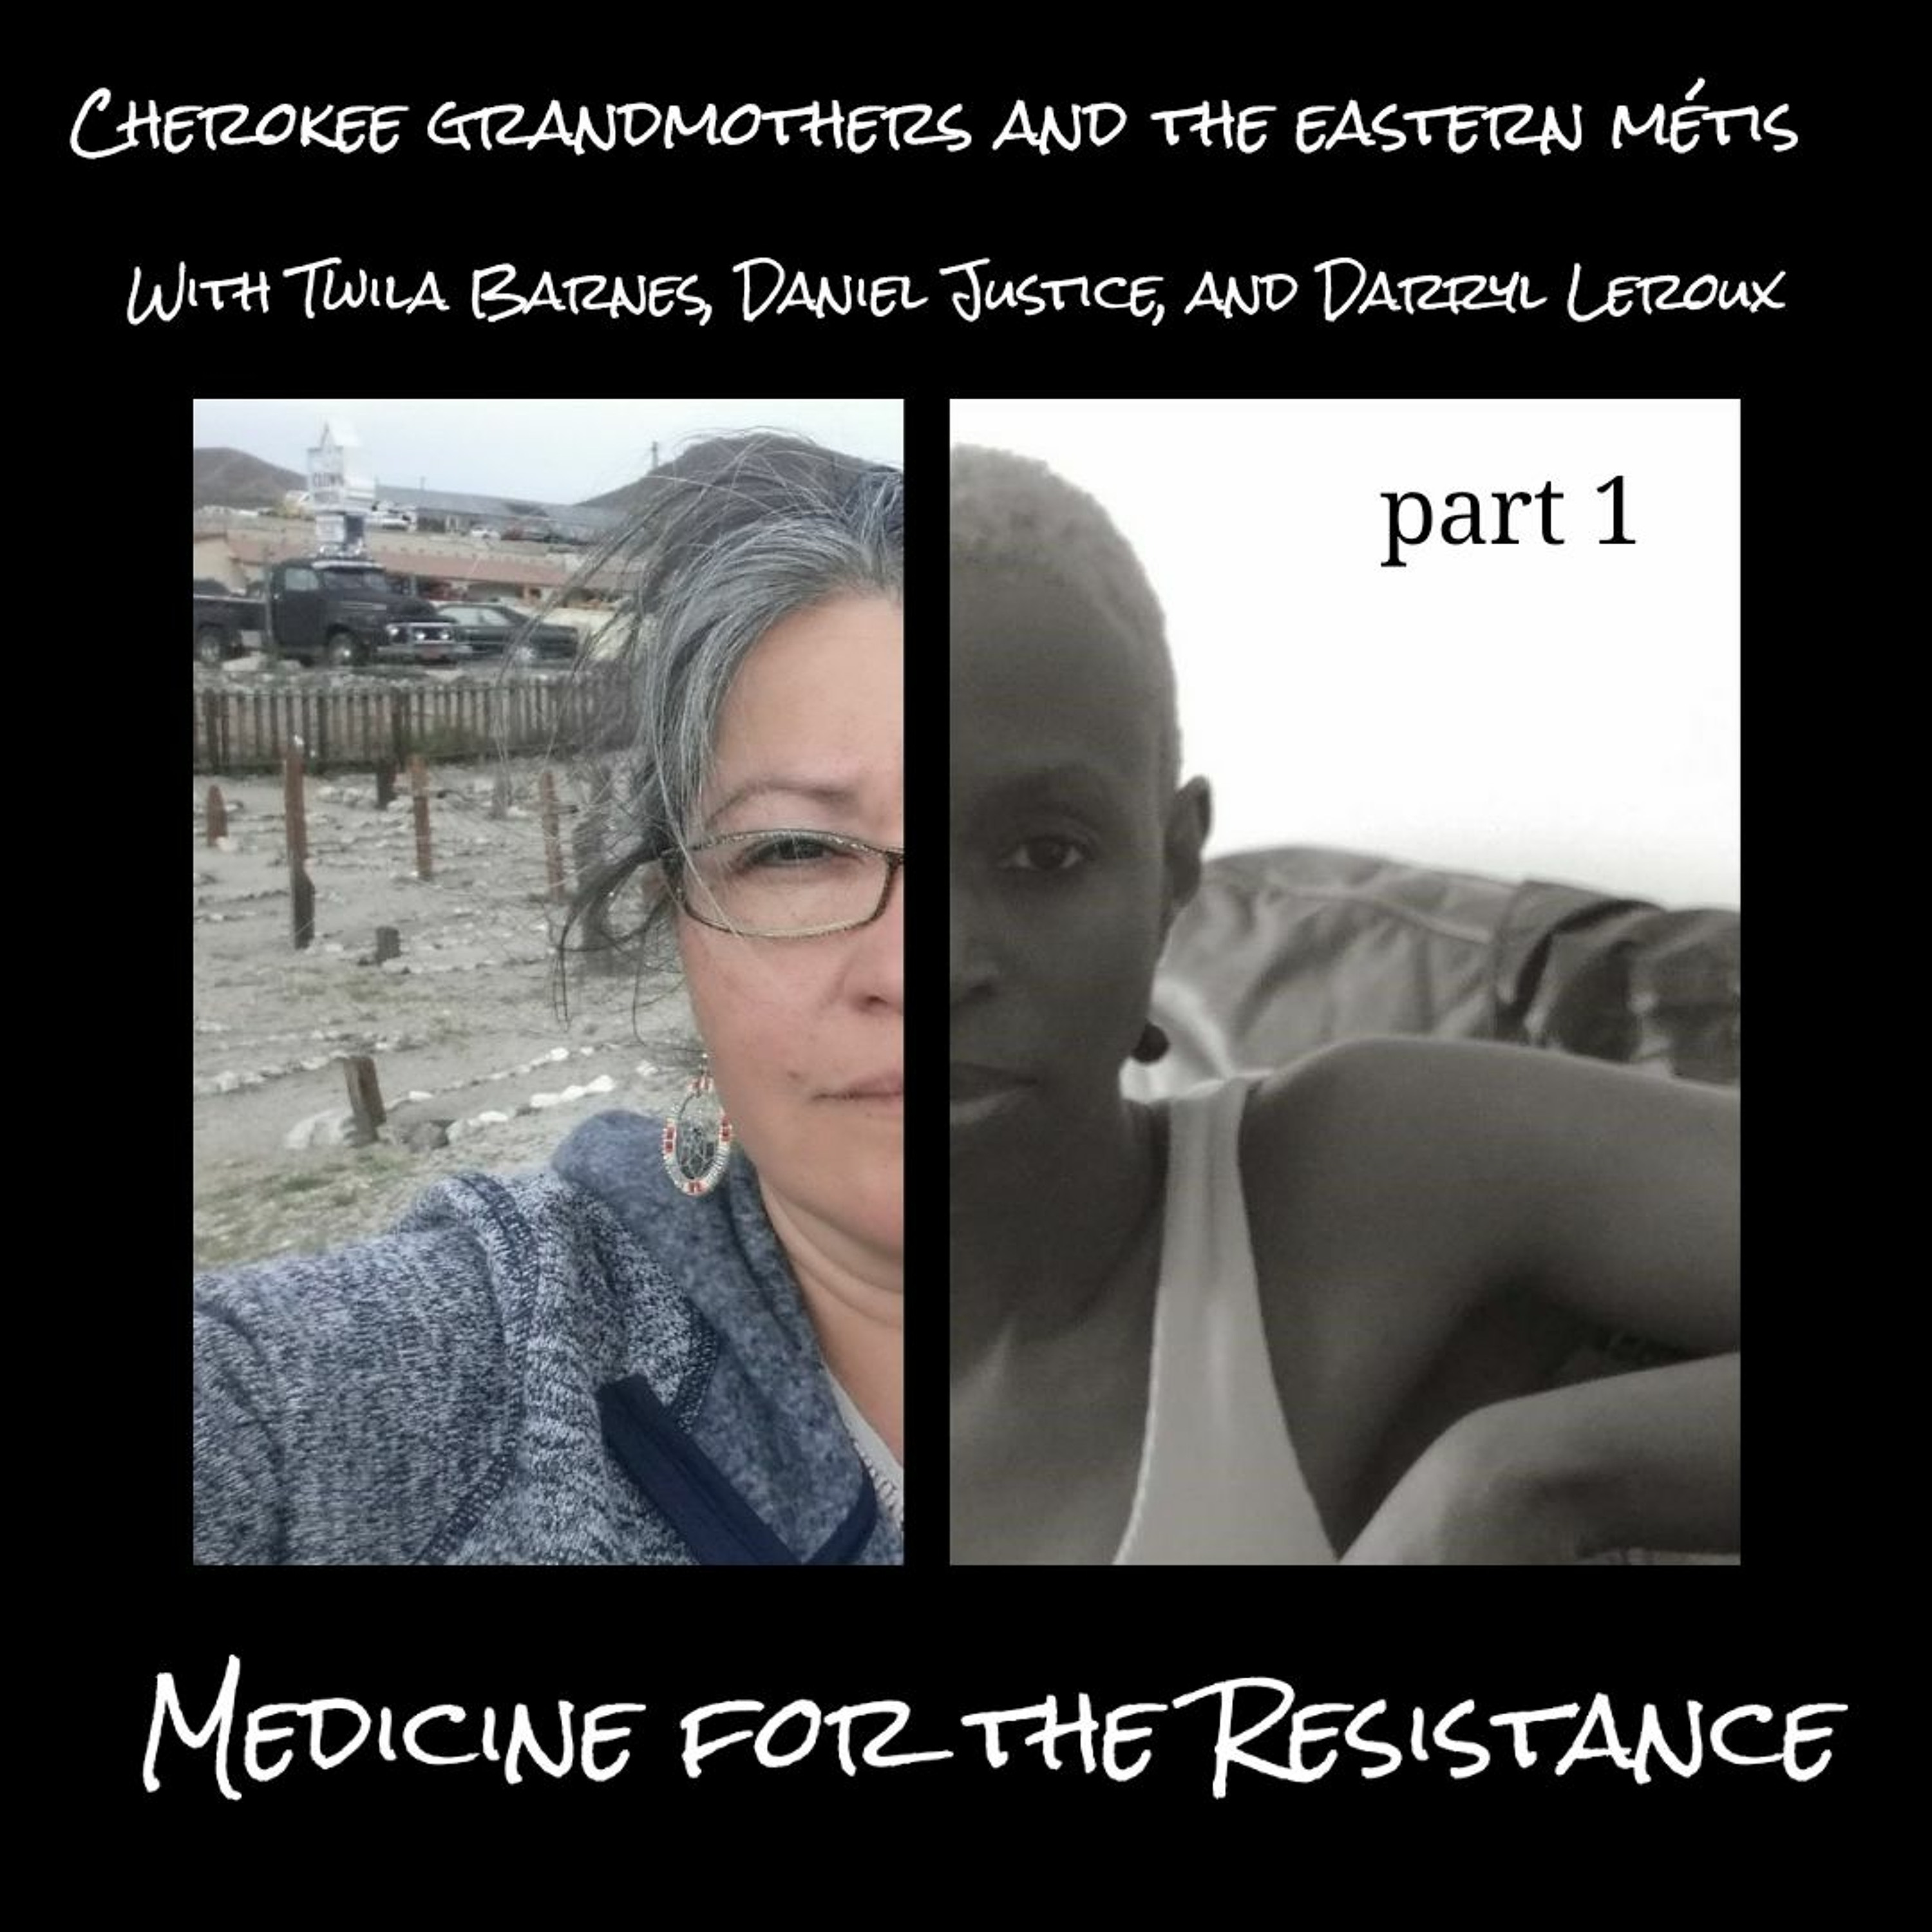 The stories we tell: Cherokee grandmothers and the eastern metis with Daniel, Twila, and Darryl